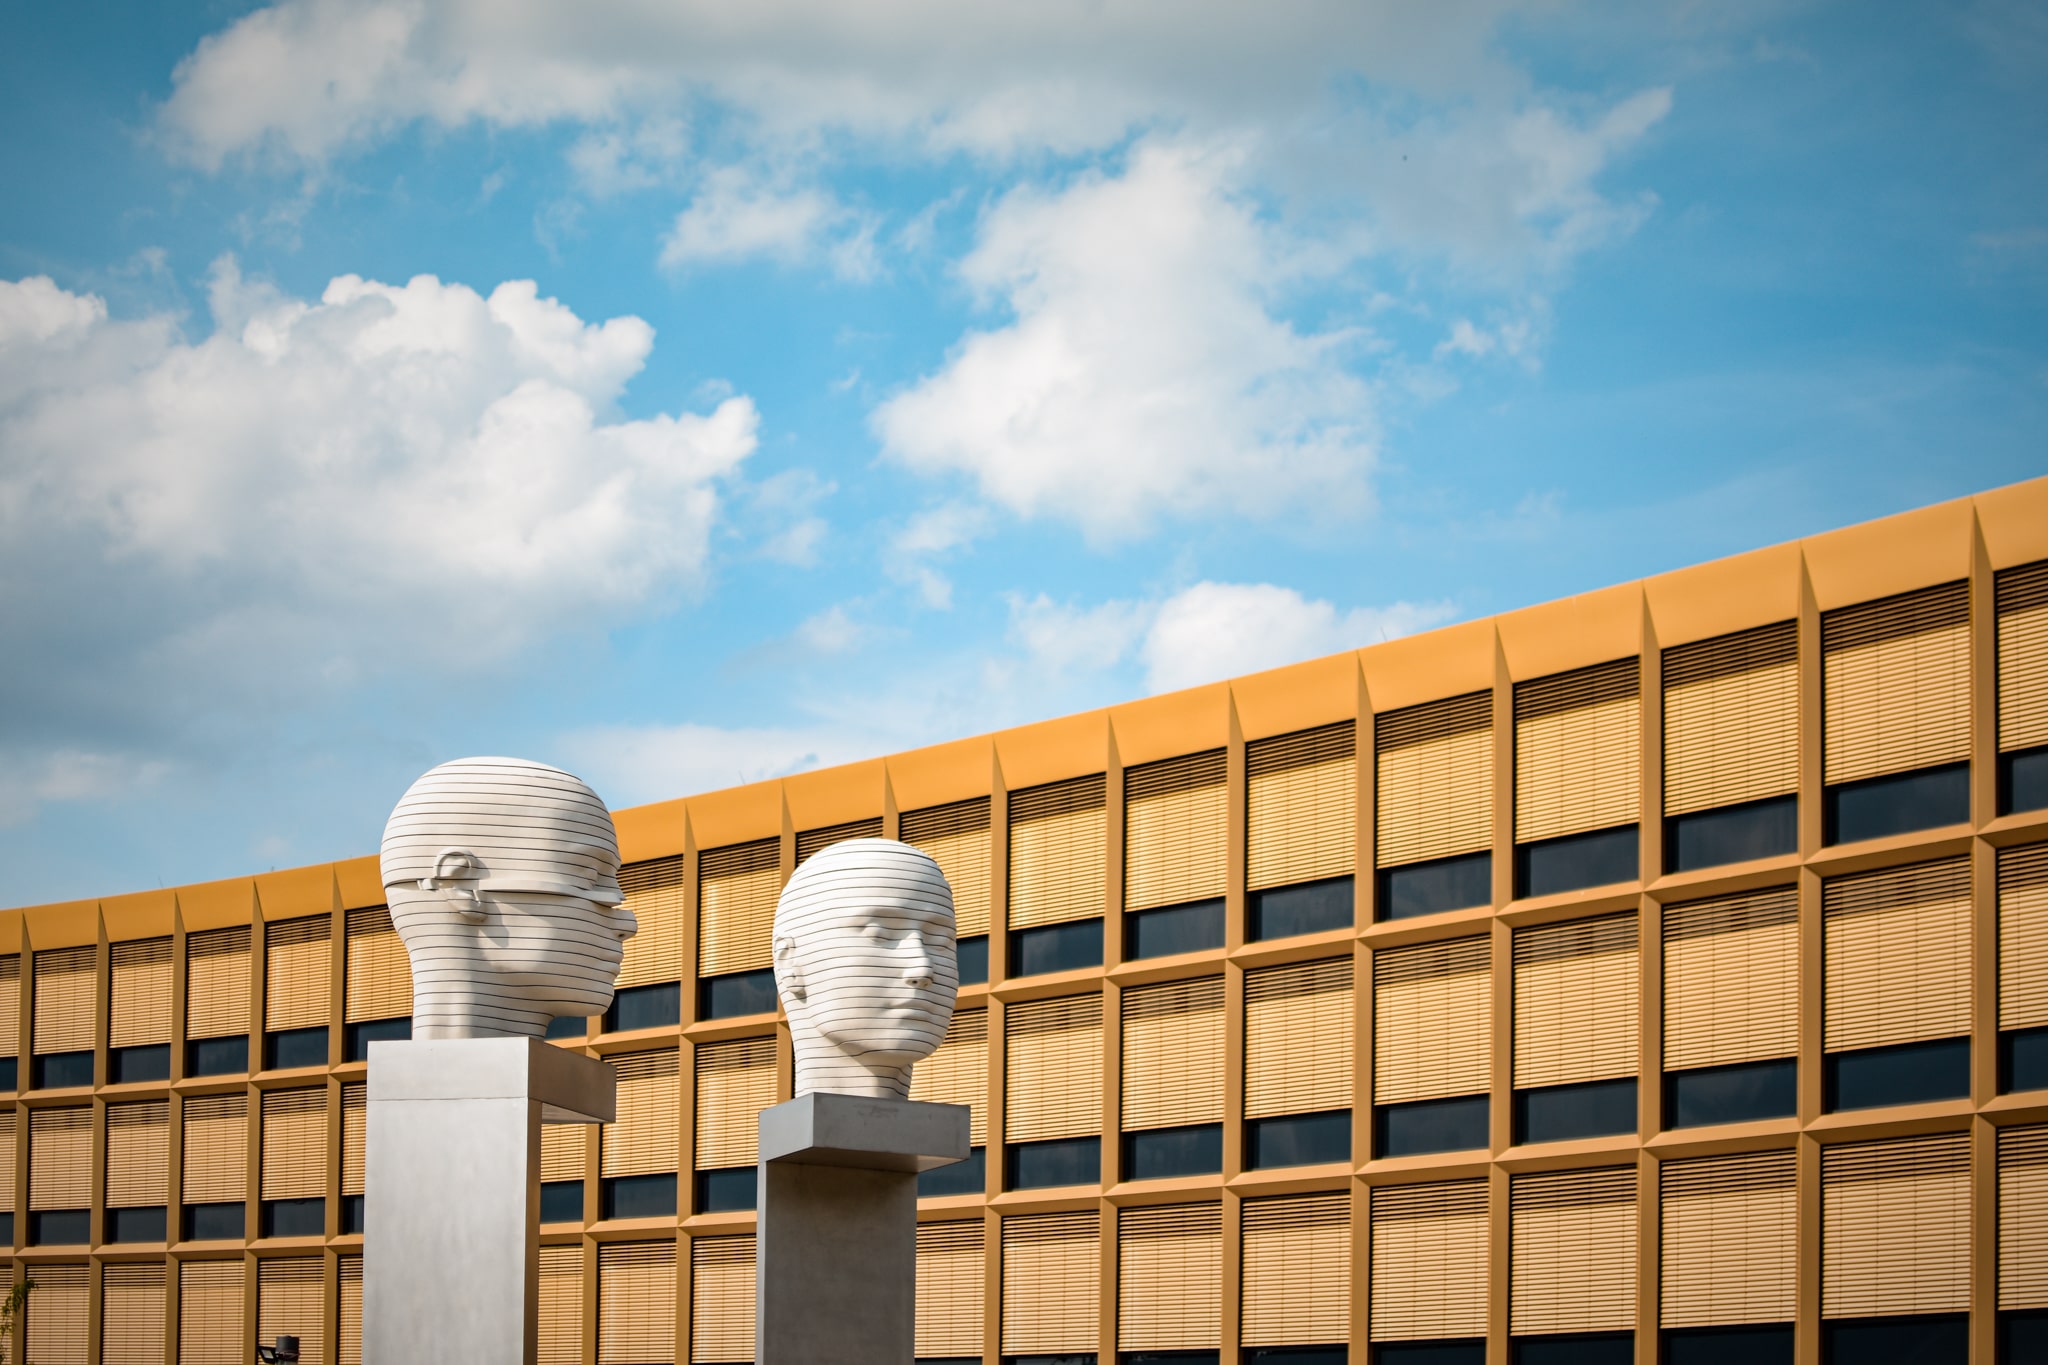 two white heads sculptures, orange house with many windows, blue sky, sunshine